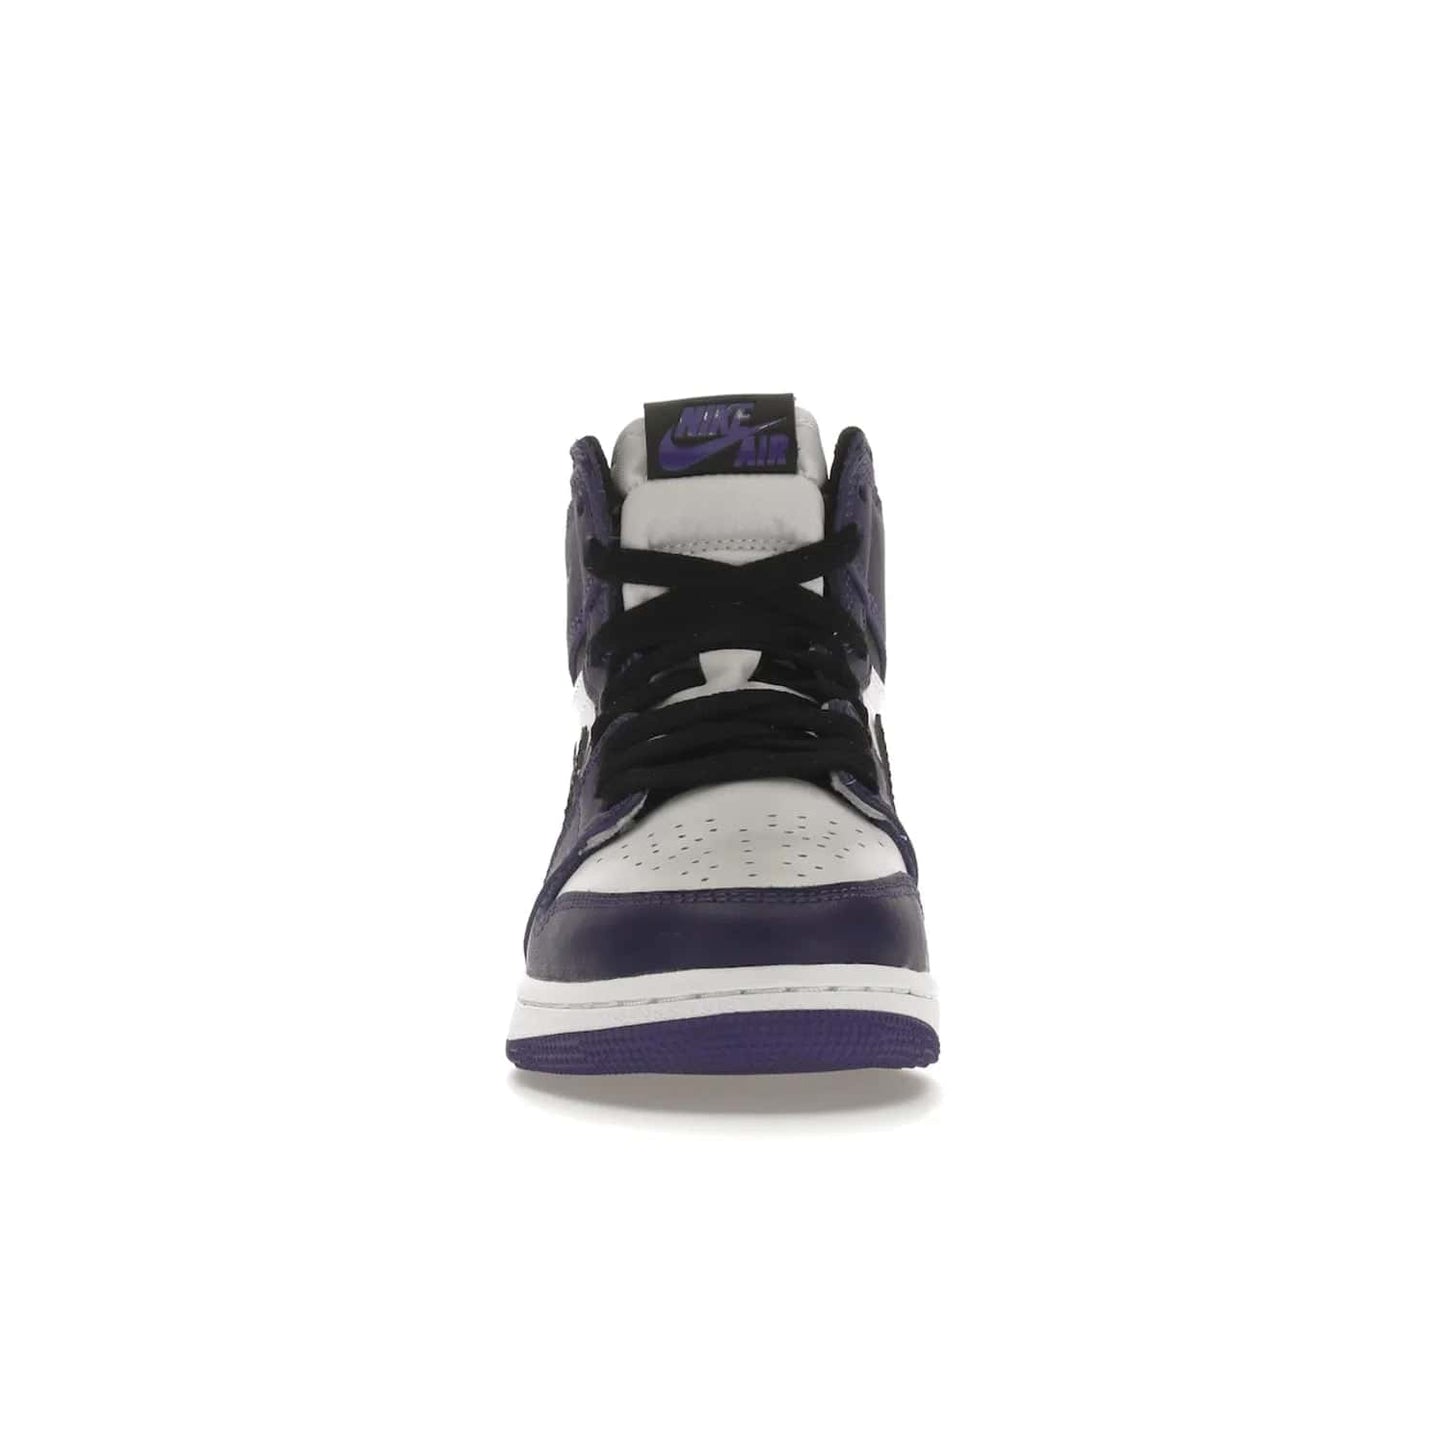 Jordan 1 Retro High Court Purple White (GS) - Image 10 - Only at www.BallersClubKickz.com - The Air Jordan 1 Retro High Court Purple is here and young sneaker heads can show off classic style. Features a white tumbled leather upper, black swoosh, purple overlays, black collar with purple overlay, white tongue, black patch with purple Nike Air logo and swoosh, white midsole, and purple rubber outsole with circular pattern.